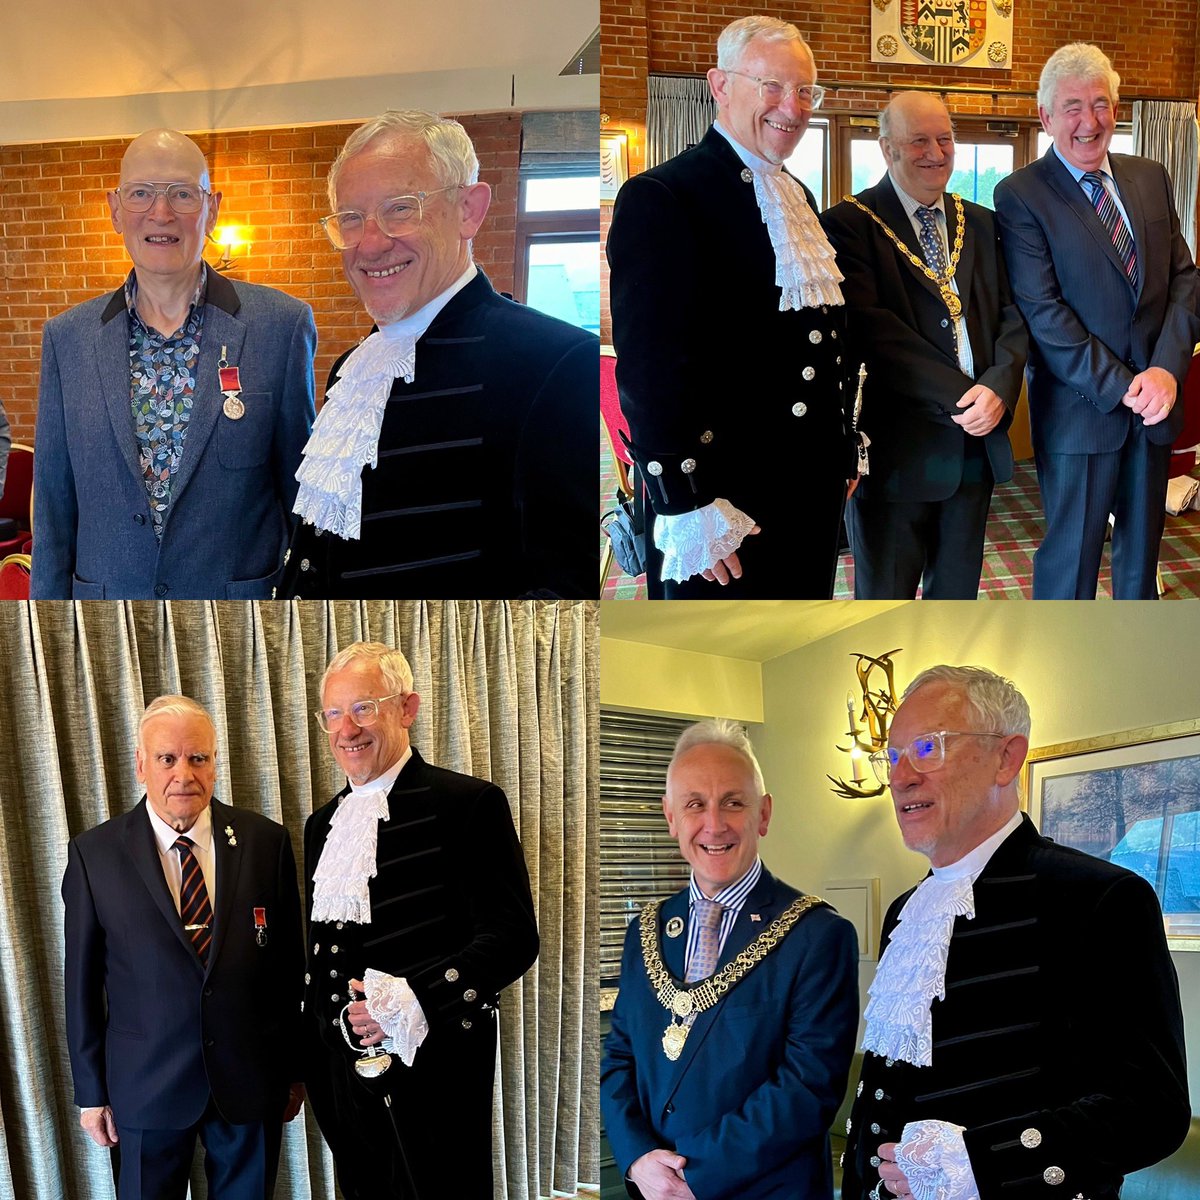 Very proud to attend the presentation of British Empire Medals to Christopher Allen, BEM, Robert David Cotterill, BEM and Howard Mansell Williams, BEM by HM Lord Lieutenant today. Outstanding service to the community by all three. A privilege to meet them. @LLDerbyshire